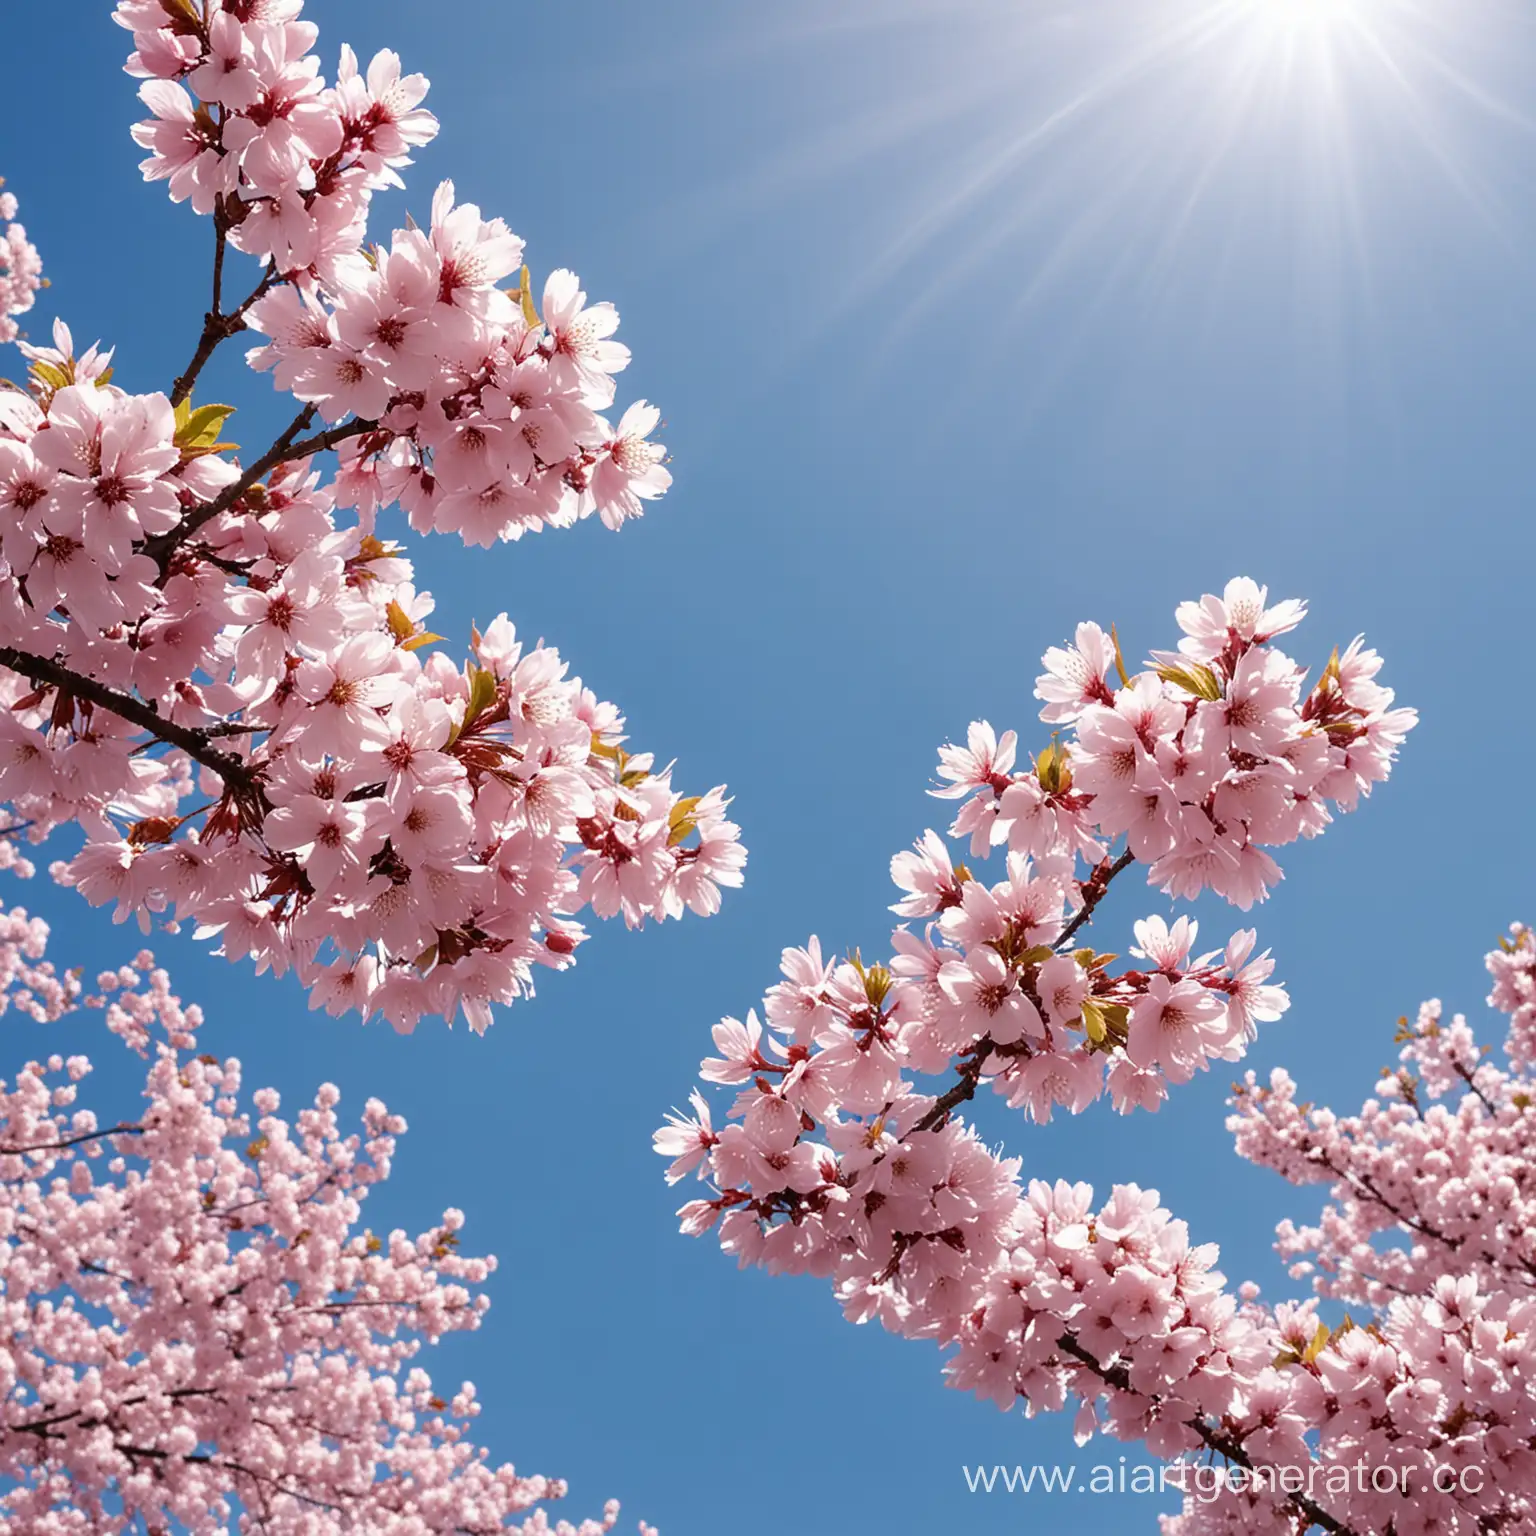 Sunny-Day-Cherry-Blossom-Petals-Dancing-in-the-Wind-under-Blue-Sky